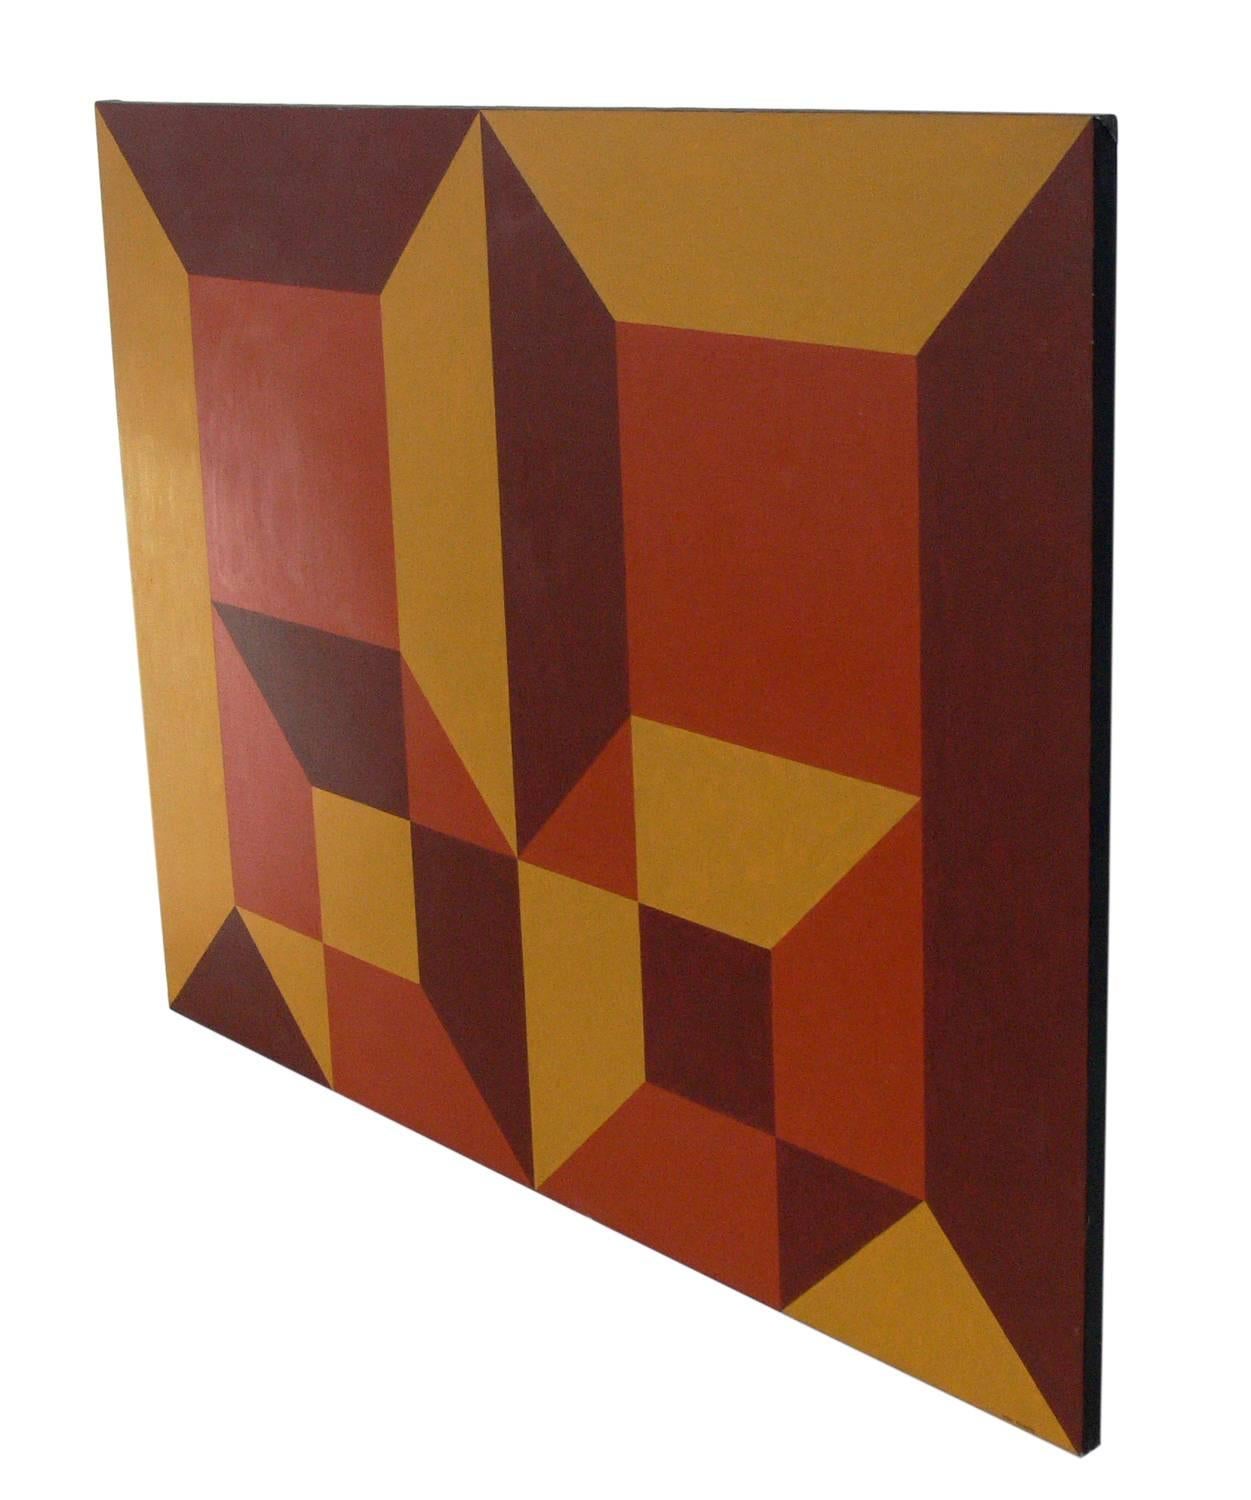 large-scale abstract painting, executed by Debbie Kowansky, July 1969. It is unframed with the painted canvas stretched around the edge so it could be hung vertically or horizontally as is without framing. Signed on the front lower right and on the